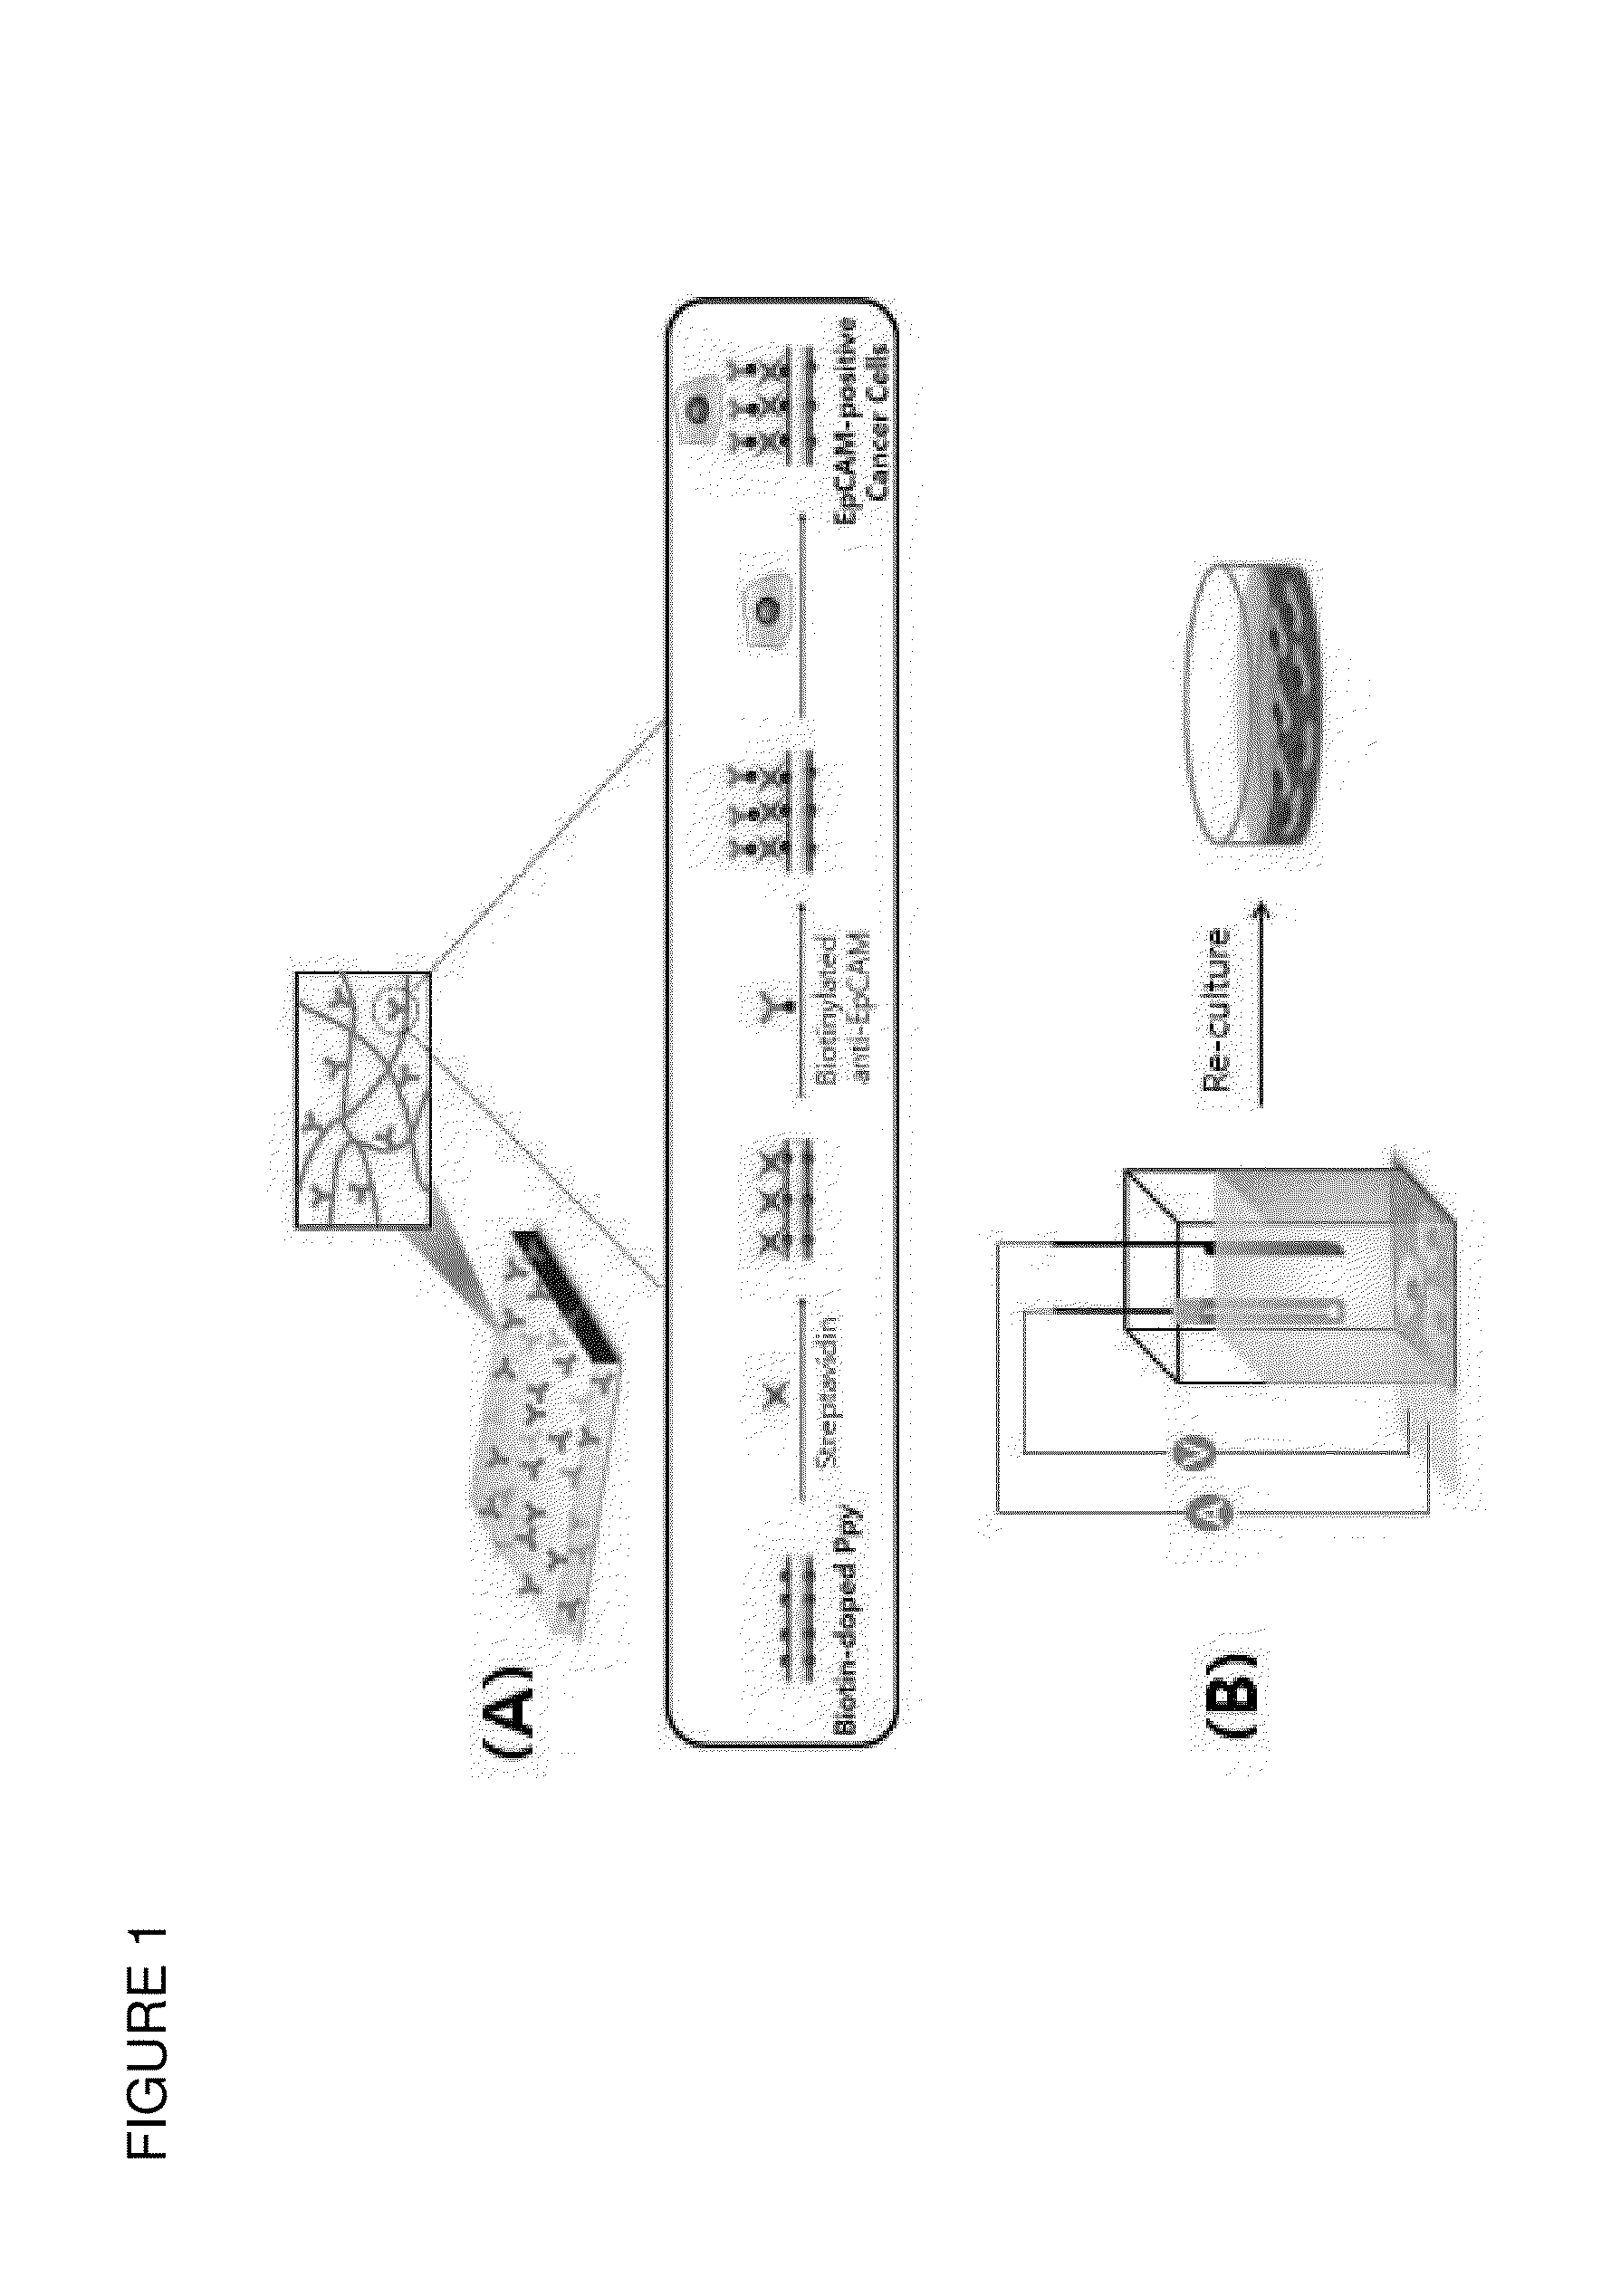 Composition comprising of a conducting polymer for detecting, capturing, releasing, and collecting cell